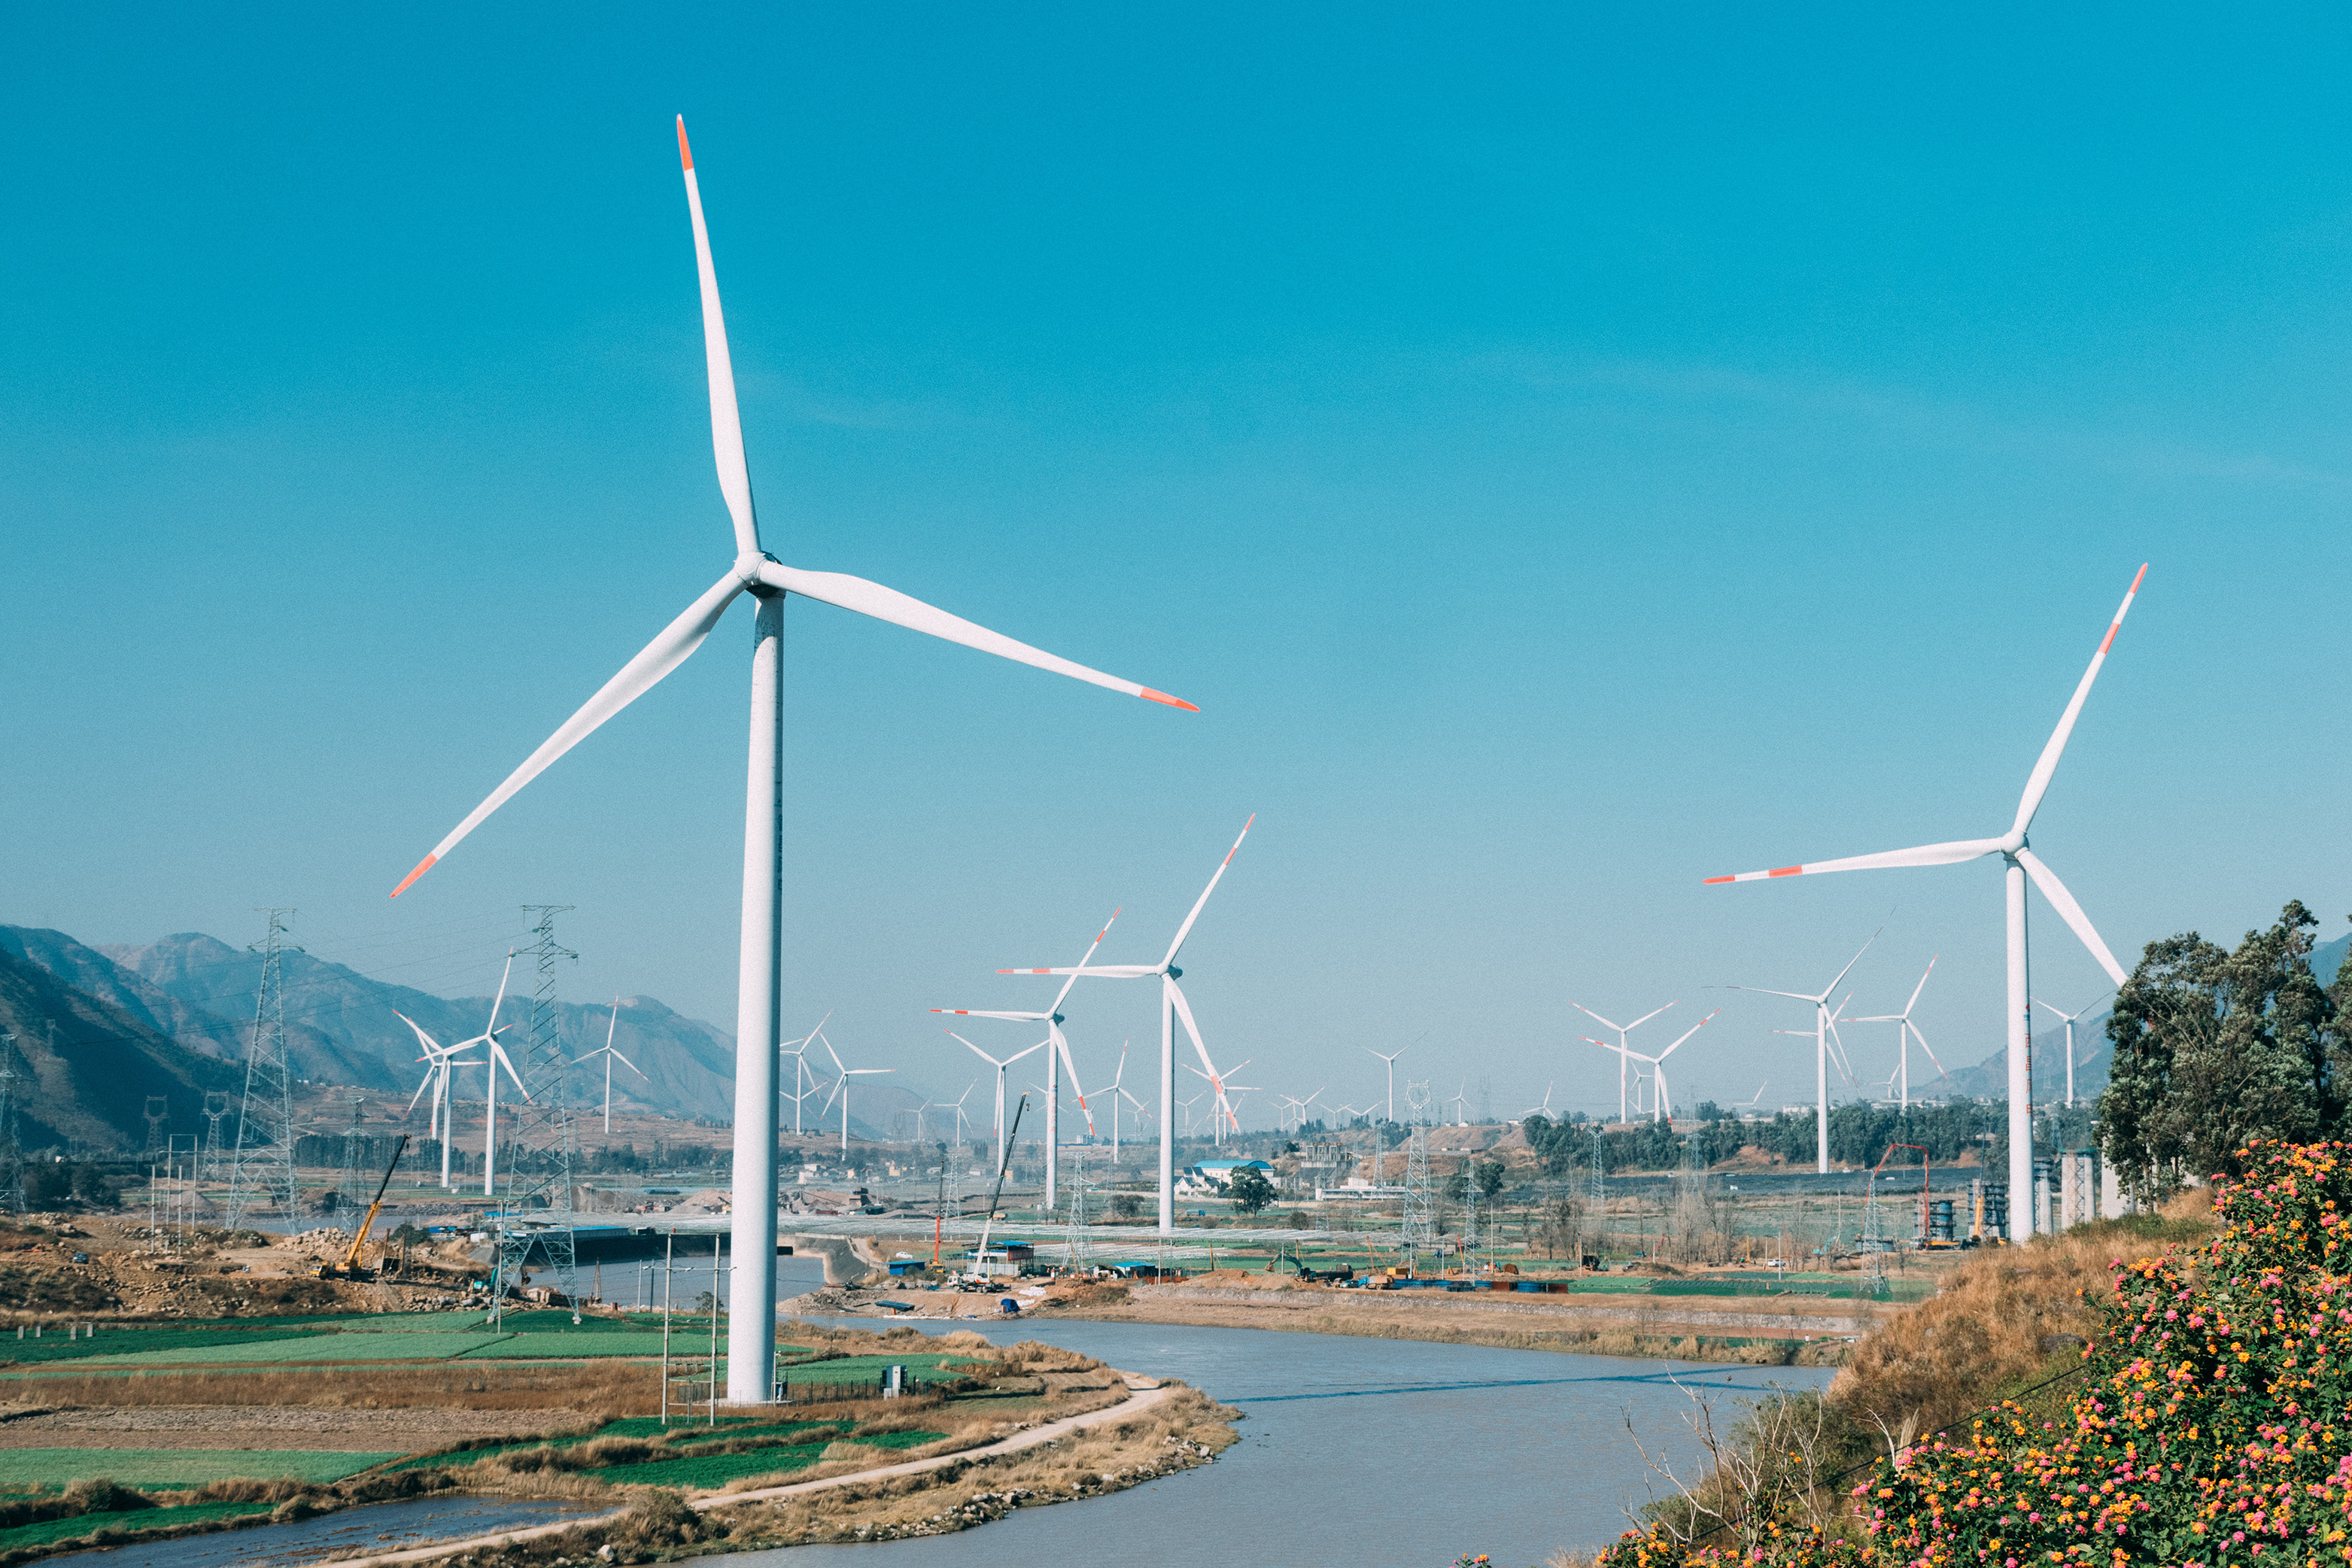 China and USA represent two major hotspots or renewable energy job opportunities